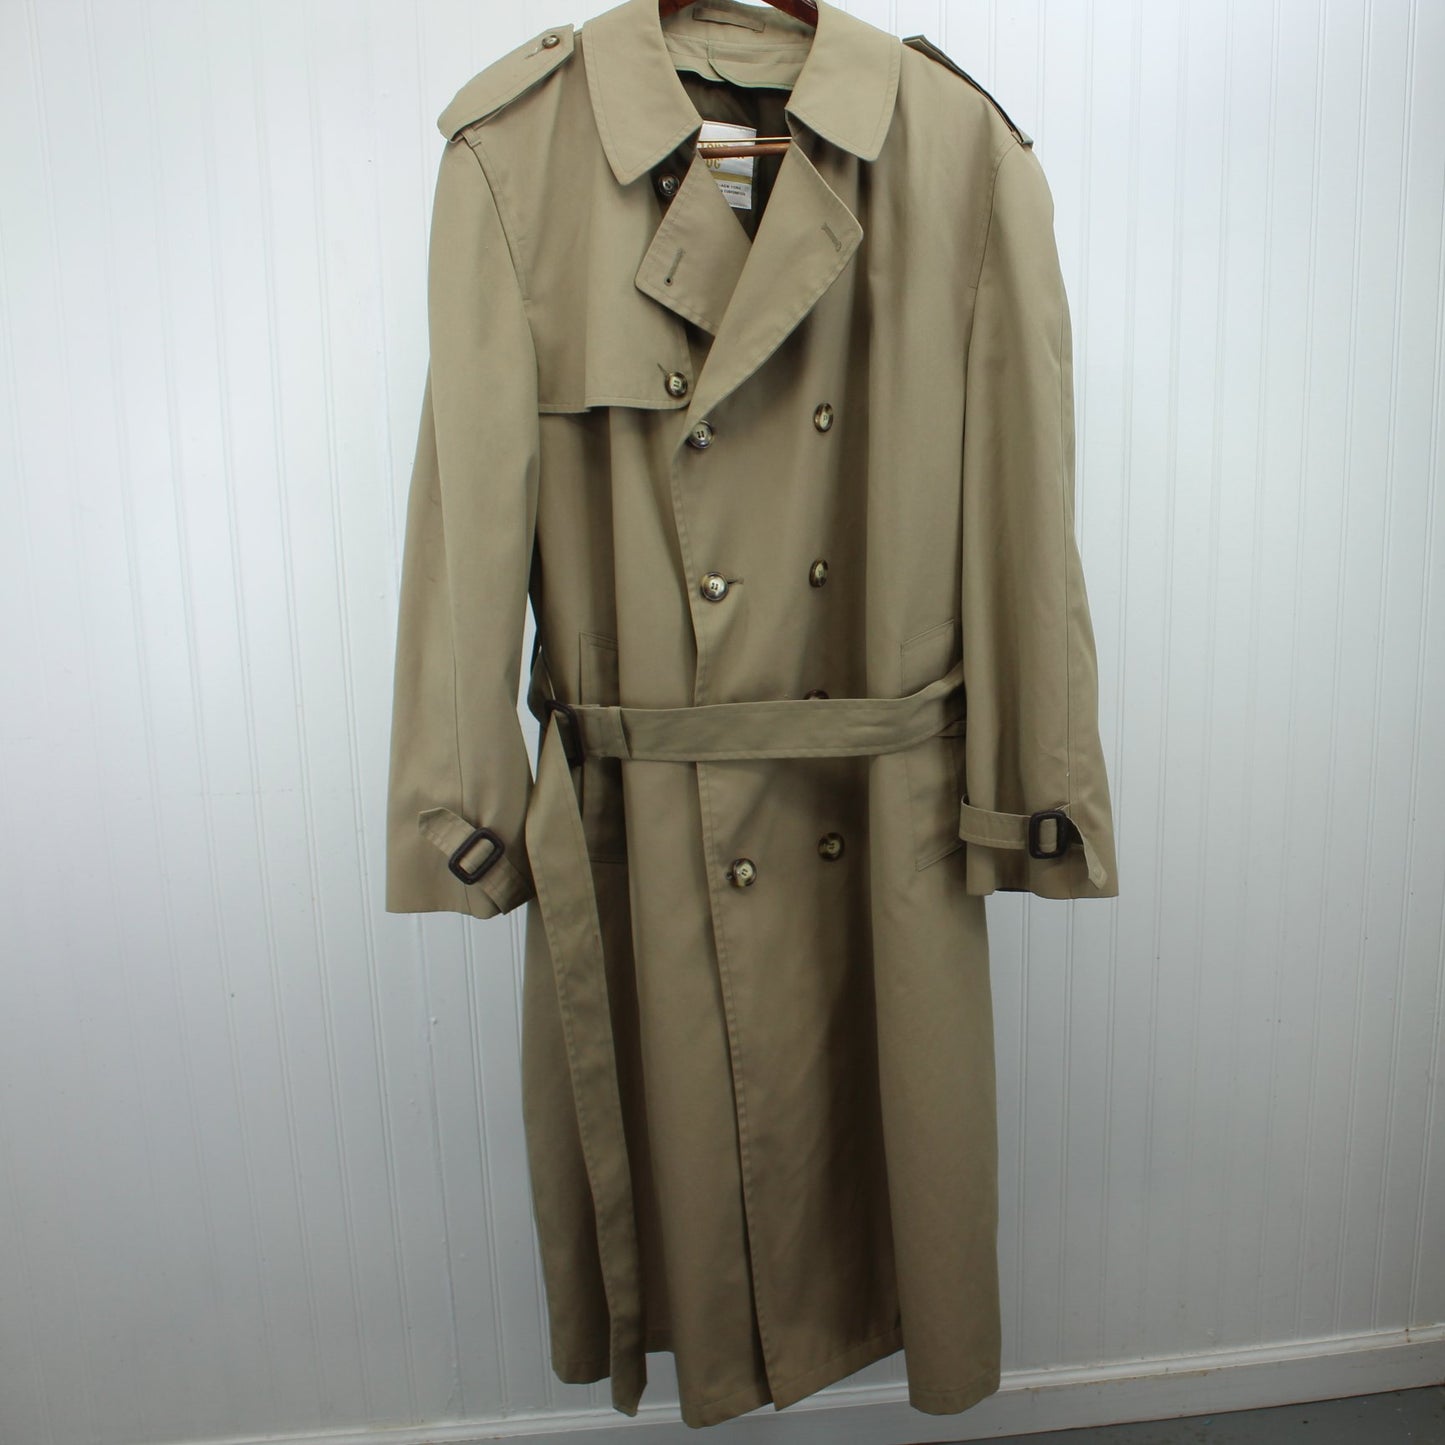 London Fog Trench Coat Men's 46L Dbl Breast Removable Thinsulate Lining